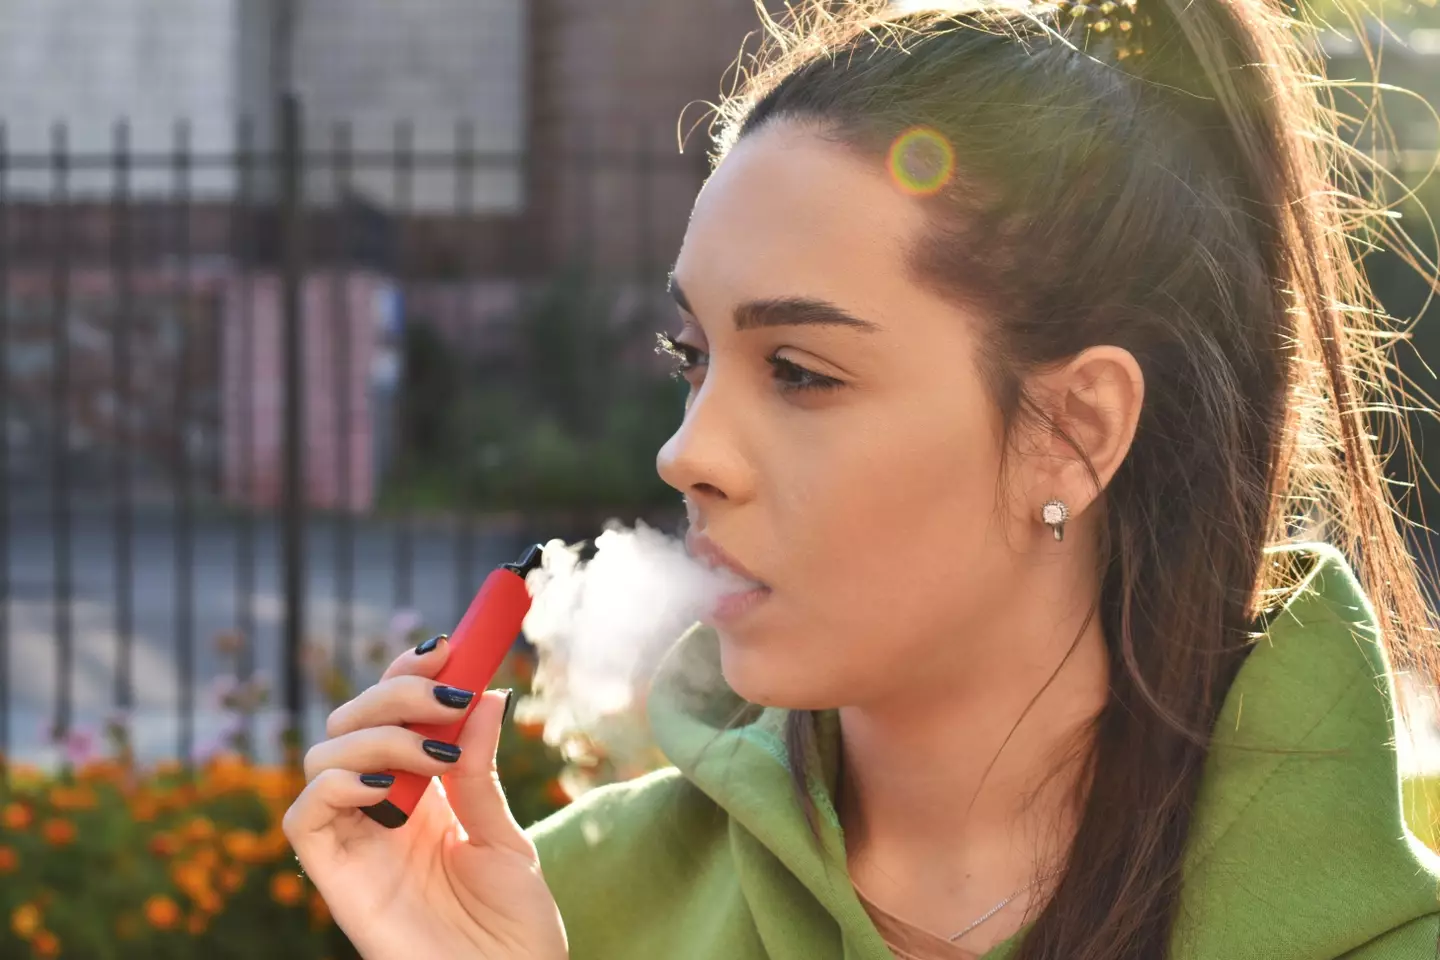 Disposable vapes have had a surge of popularity.